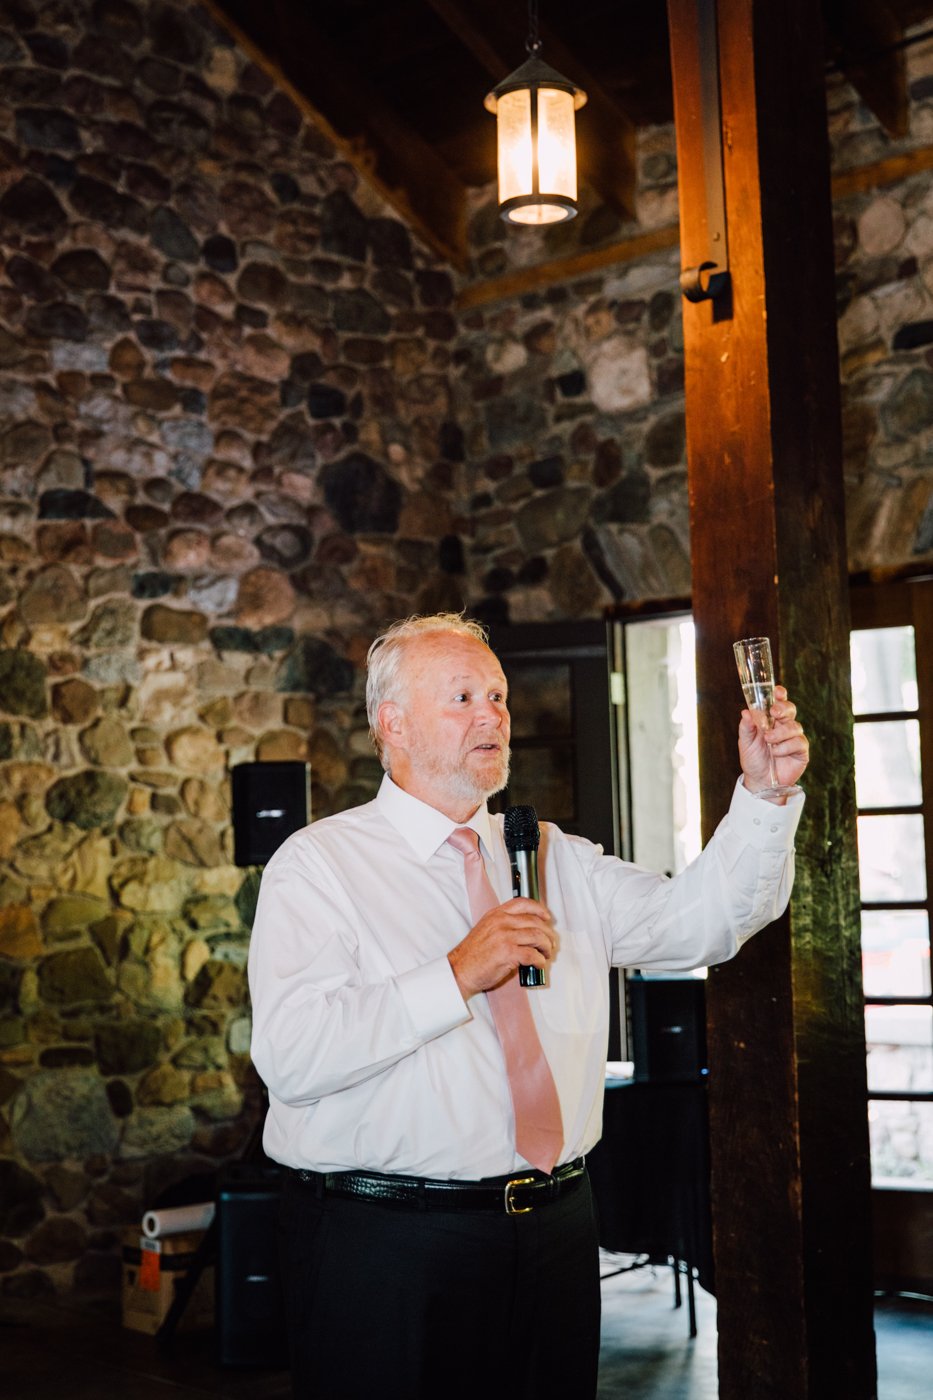  Man holds up a glass of champagne while giving a wedding reception toast 